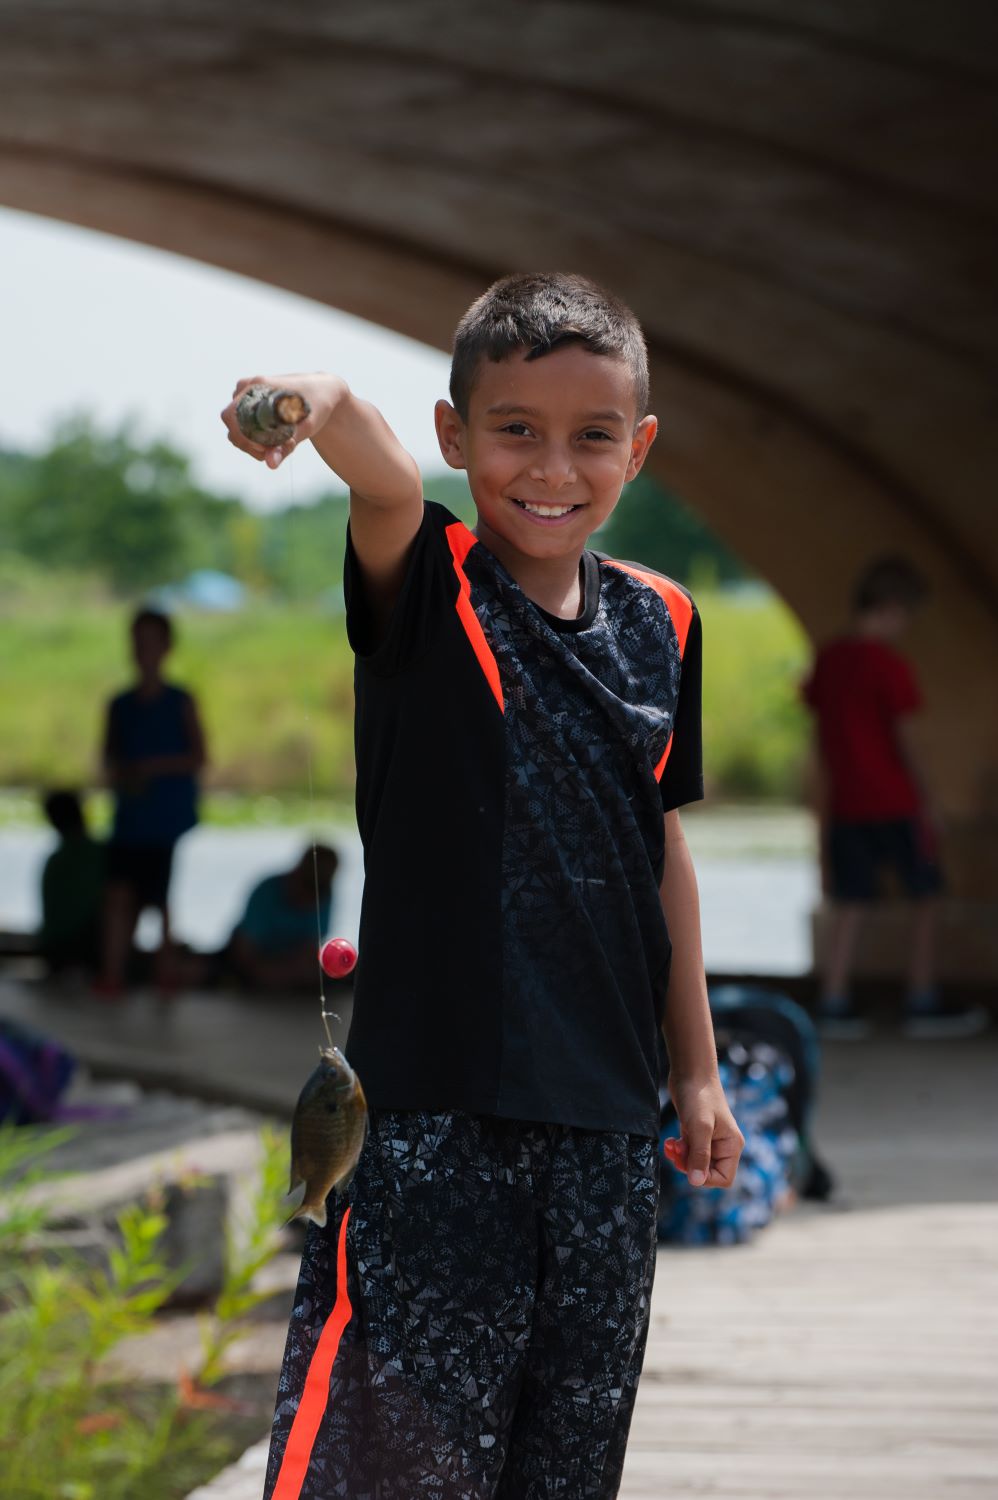 Boy in a summer camp holding up fish he caught on his homemade fishing rod.